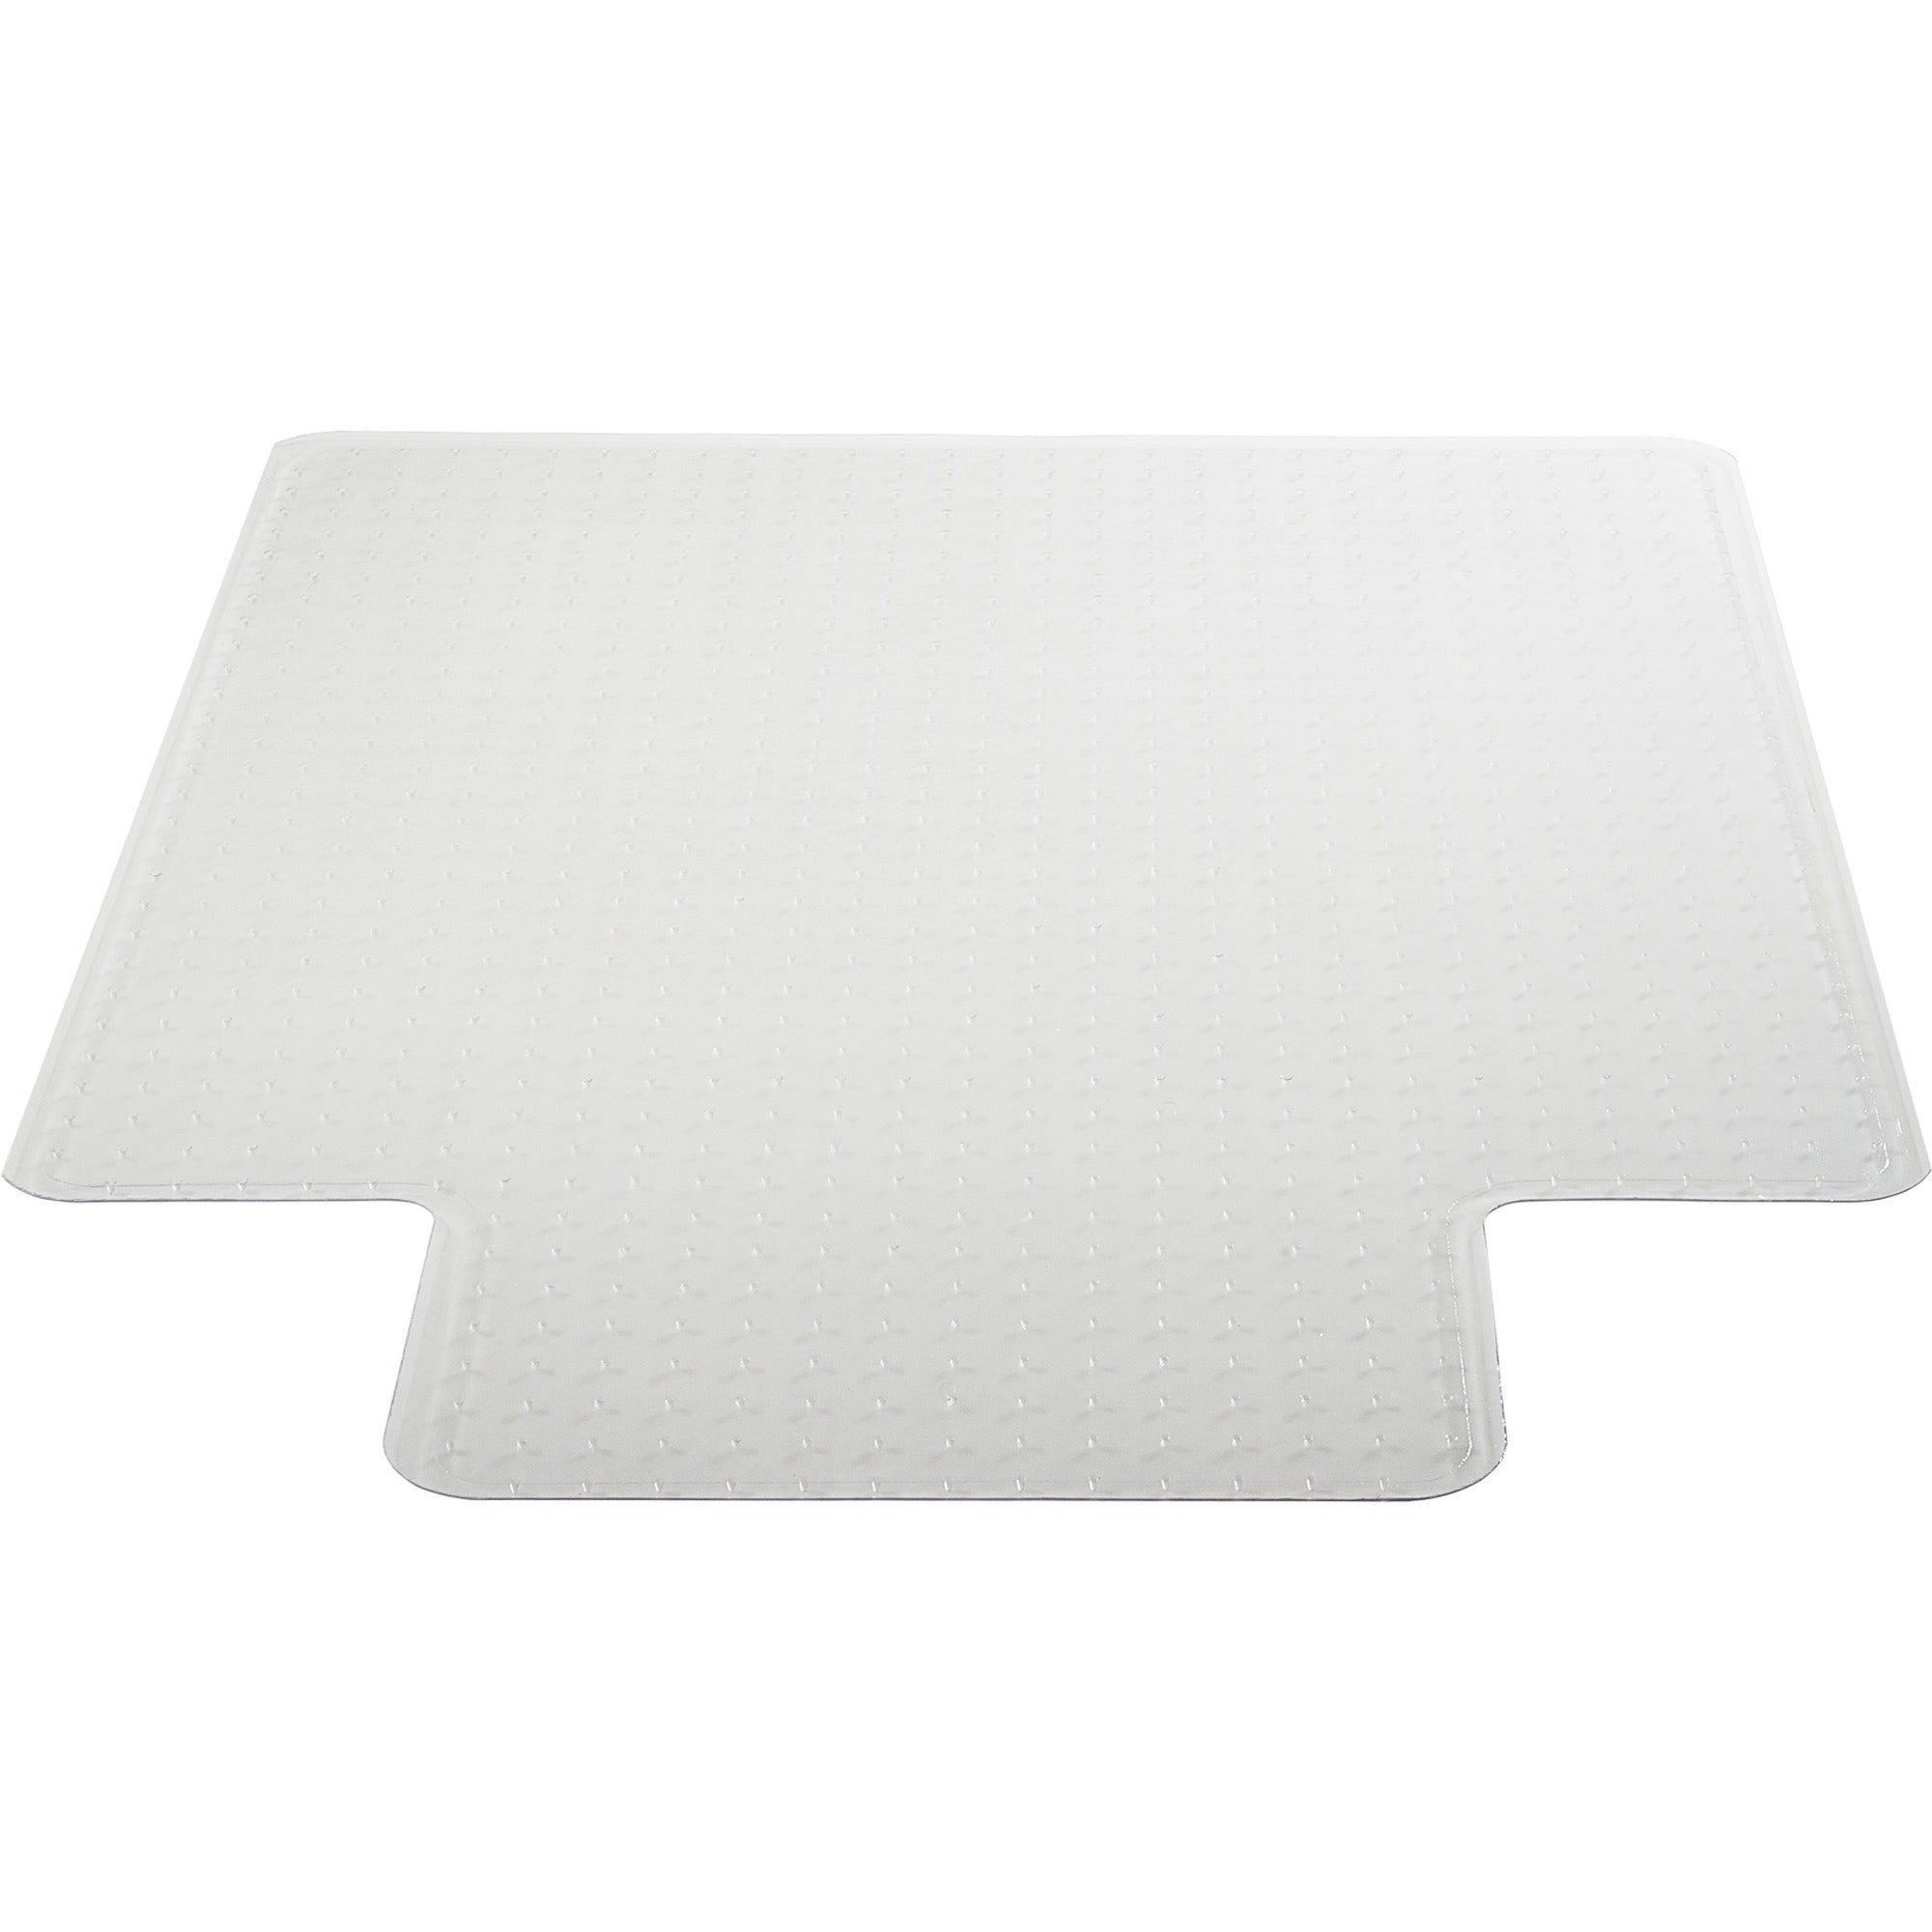 Lorell Standard Lip Low-pile Chairmat - Carpeted Floor - 48" Length x 36" Width x 0.112" Thickness - Lip Size 10" Length x 19" Width - Vinyl - Clear - 1Each - 